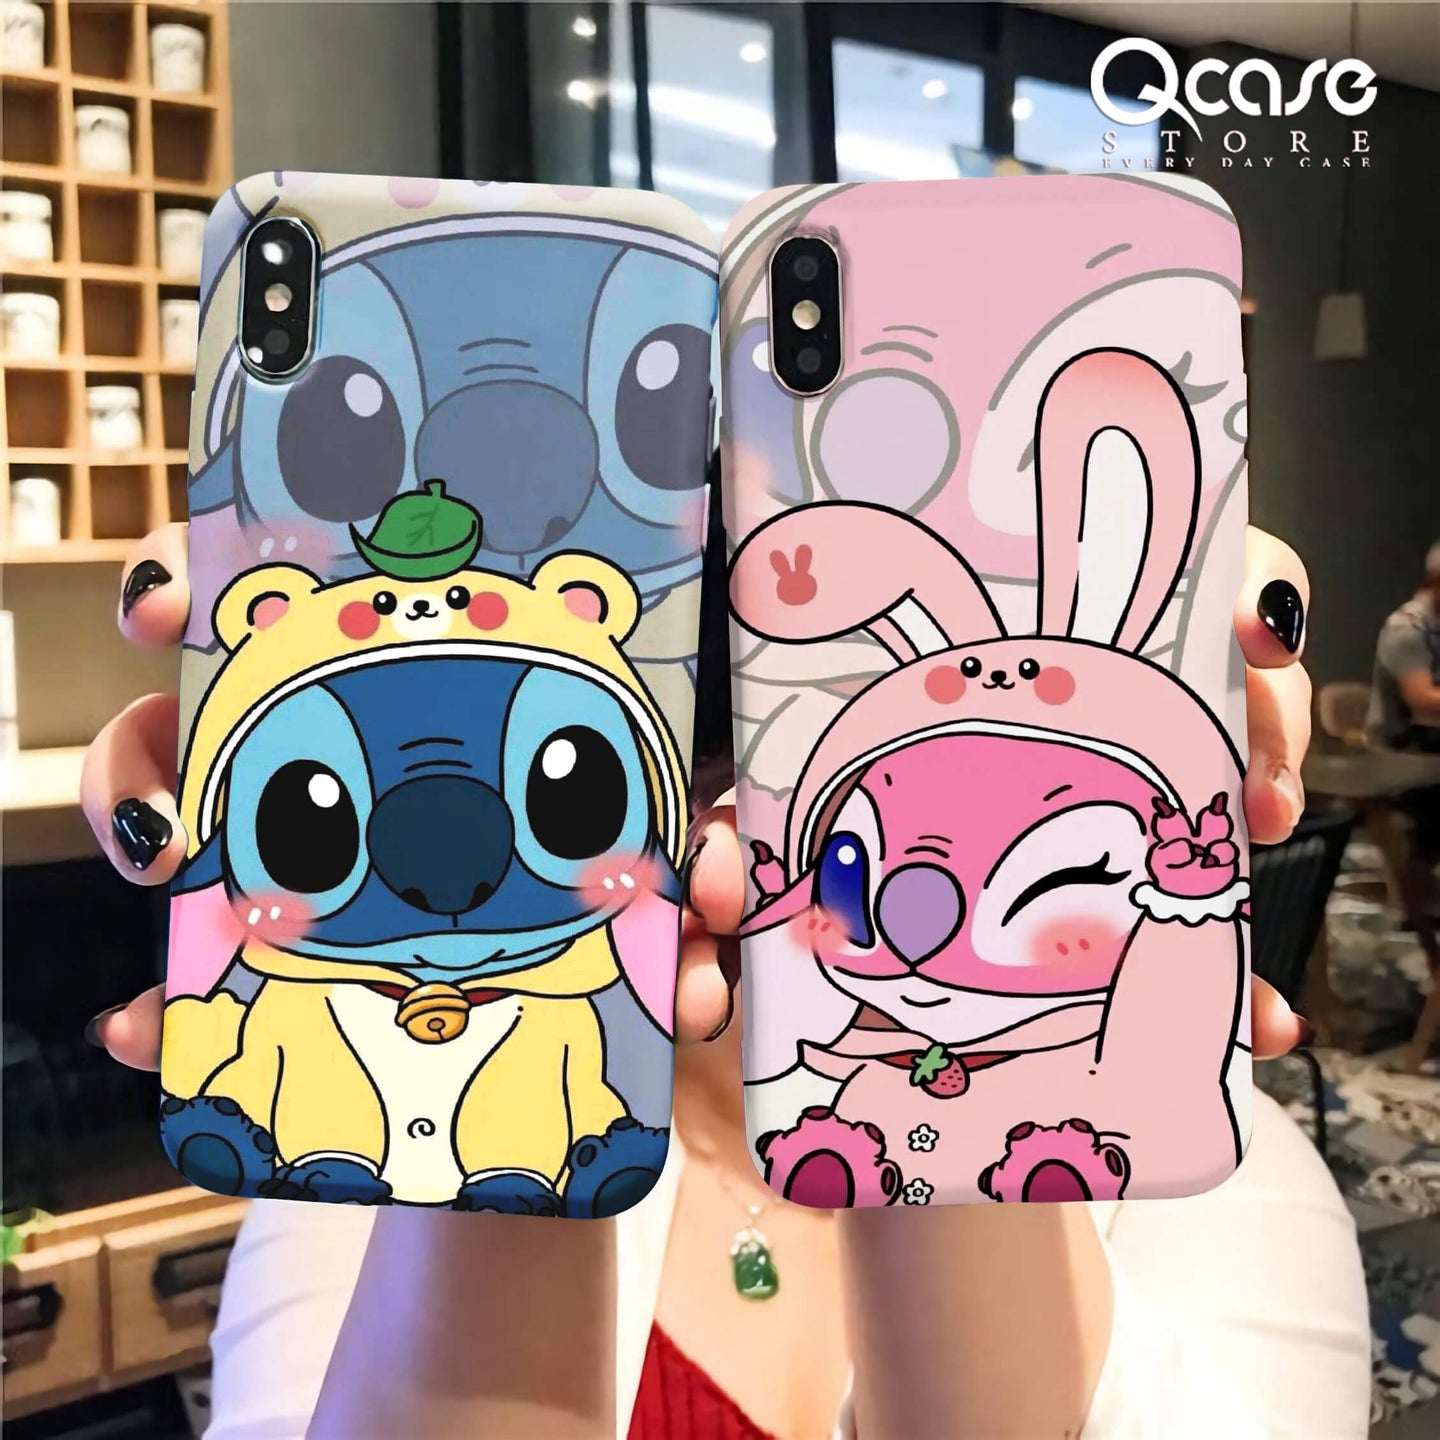 Cute Couple matching stitsh Phone Cases